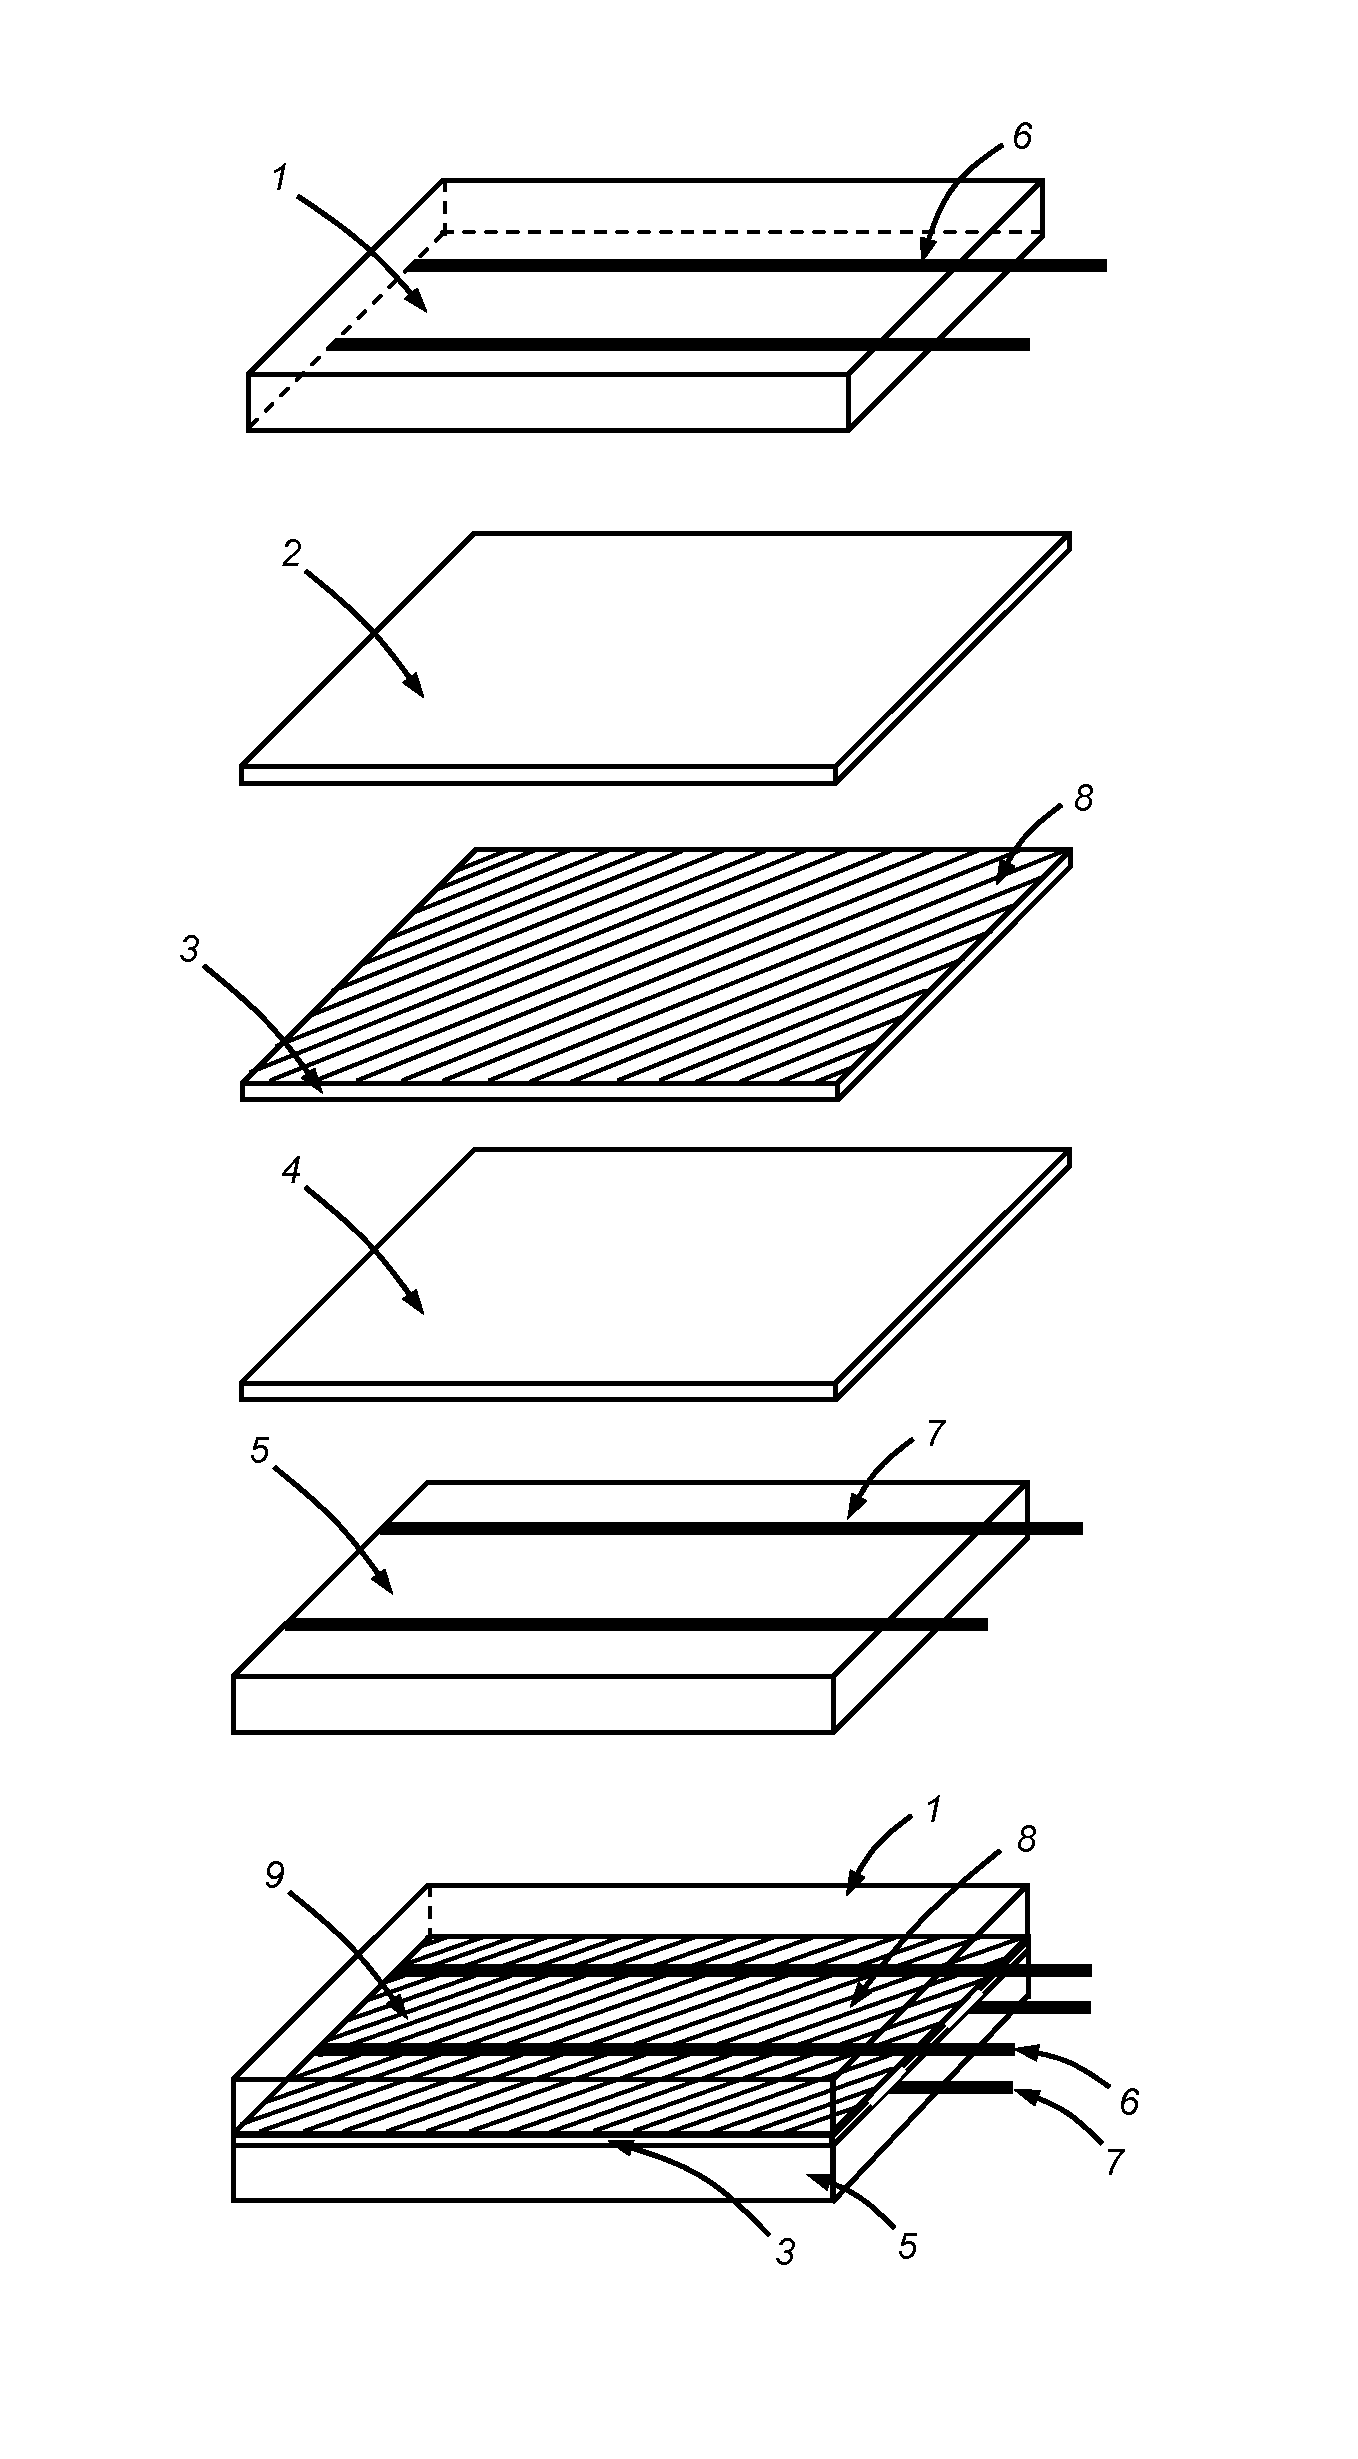 Single-cell encapsulation and flexible-format module architecture for photovoltaic power generation and method for constructing the same